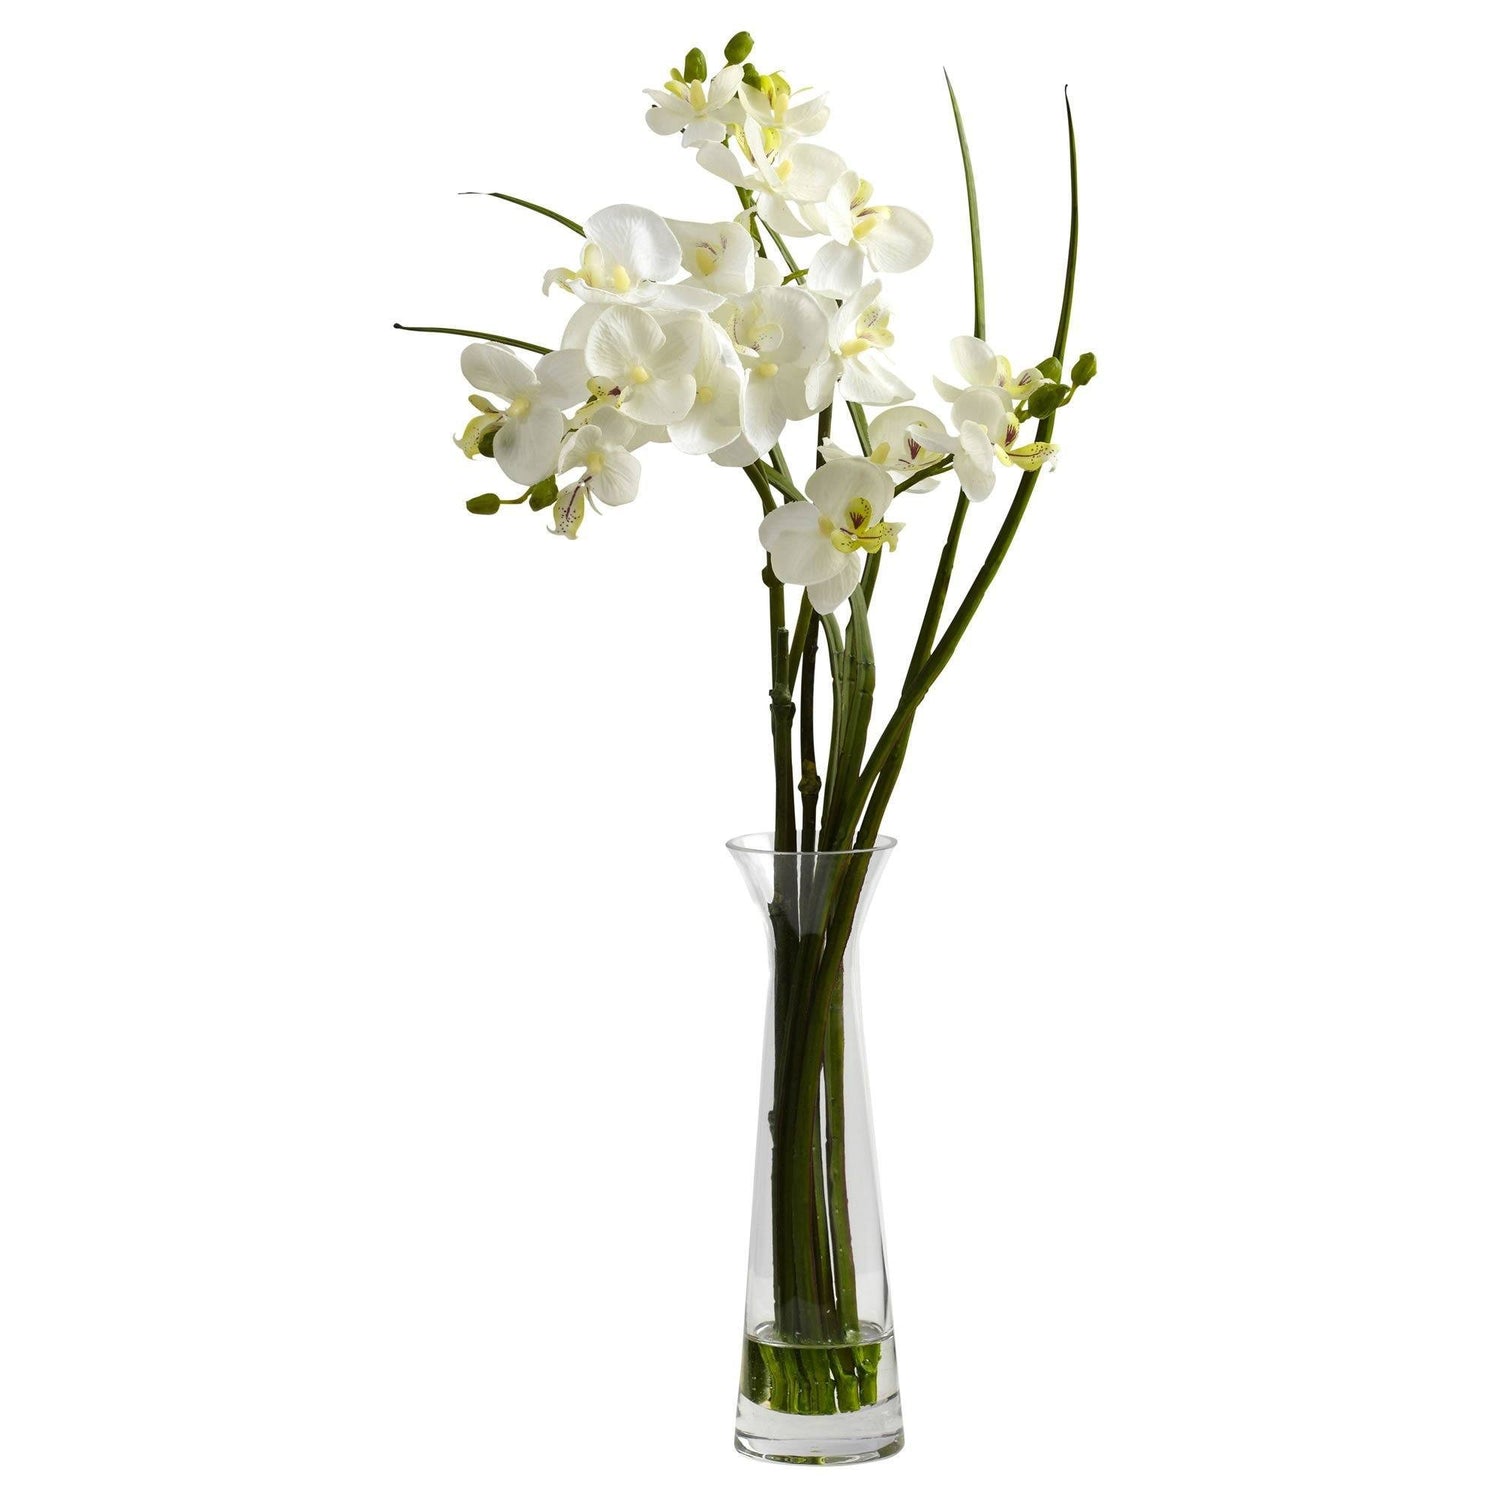 18" Artificial Mini Phalaenopsis In Colored Vases (Set of 4)"